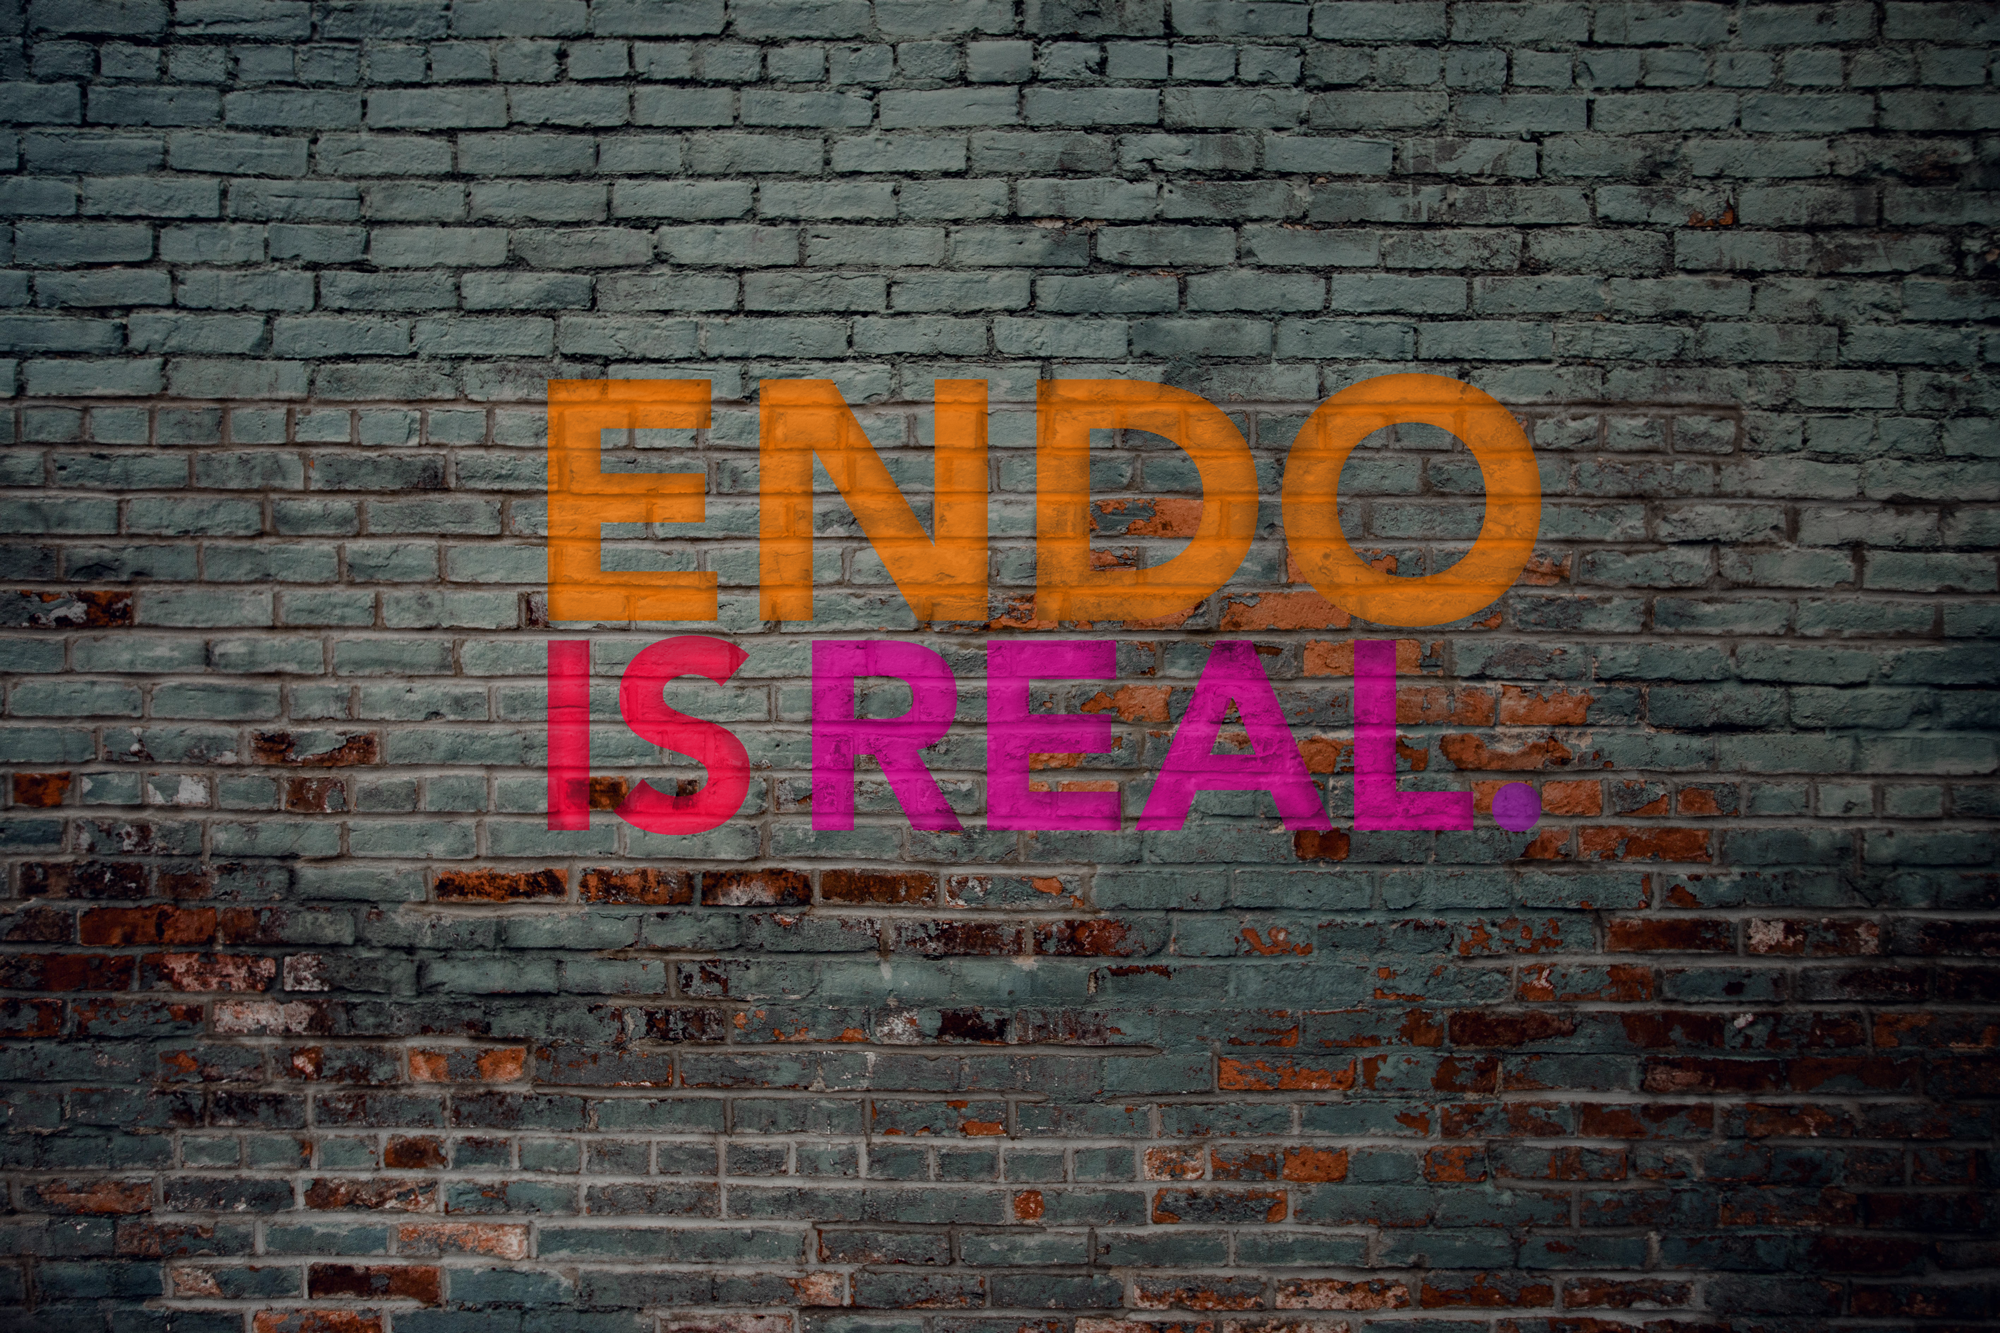 ENDO IS REAL written on a brick wall background